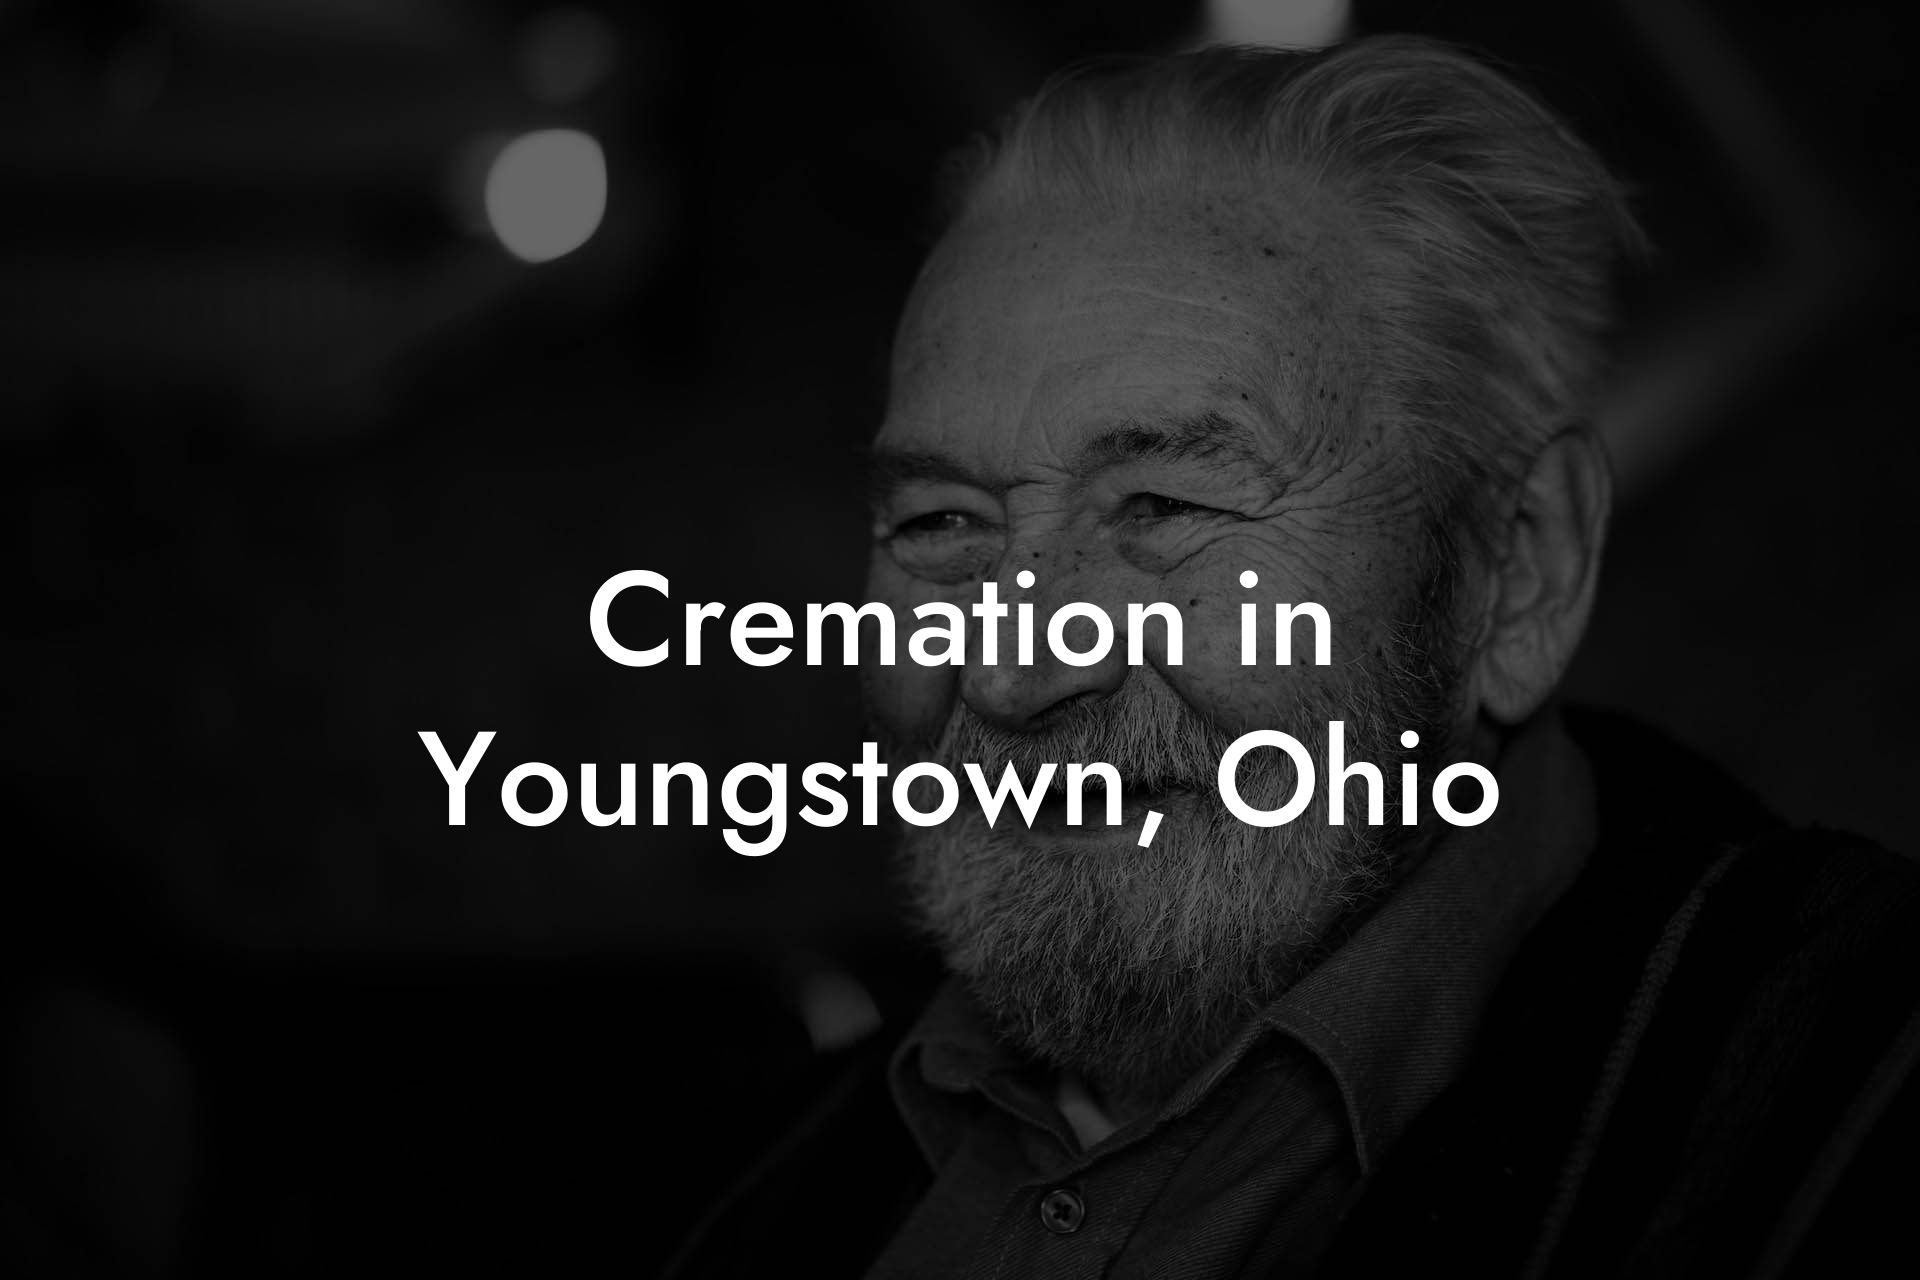 Cremation in Youngstown, Ohio